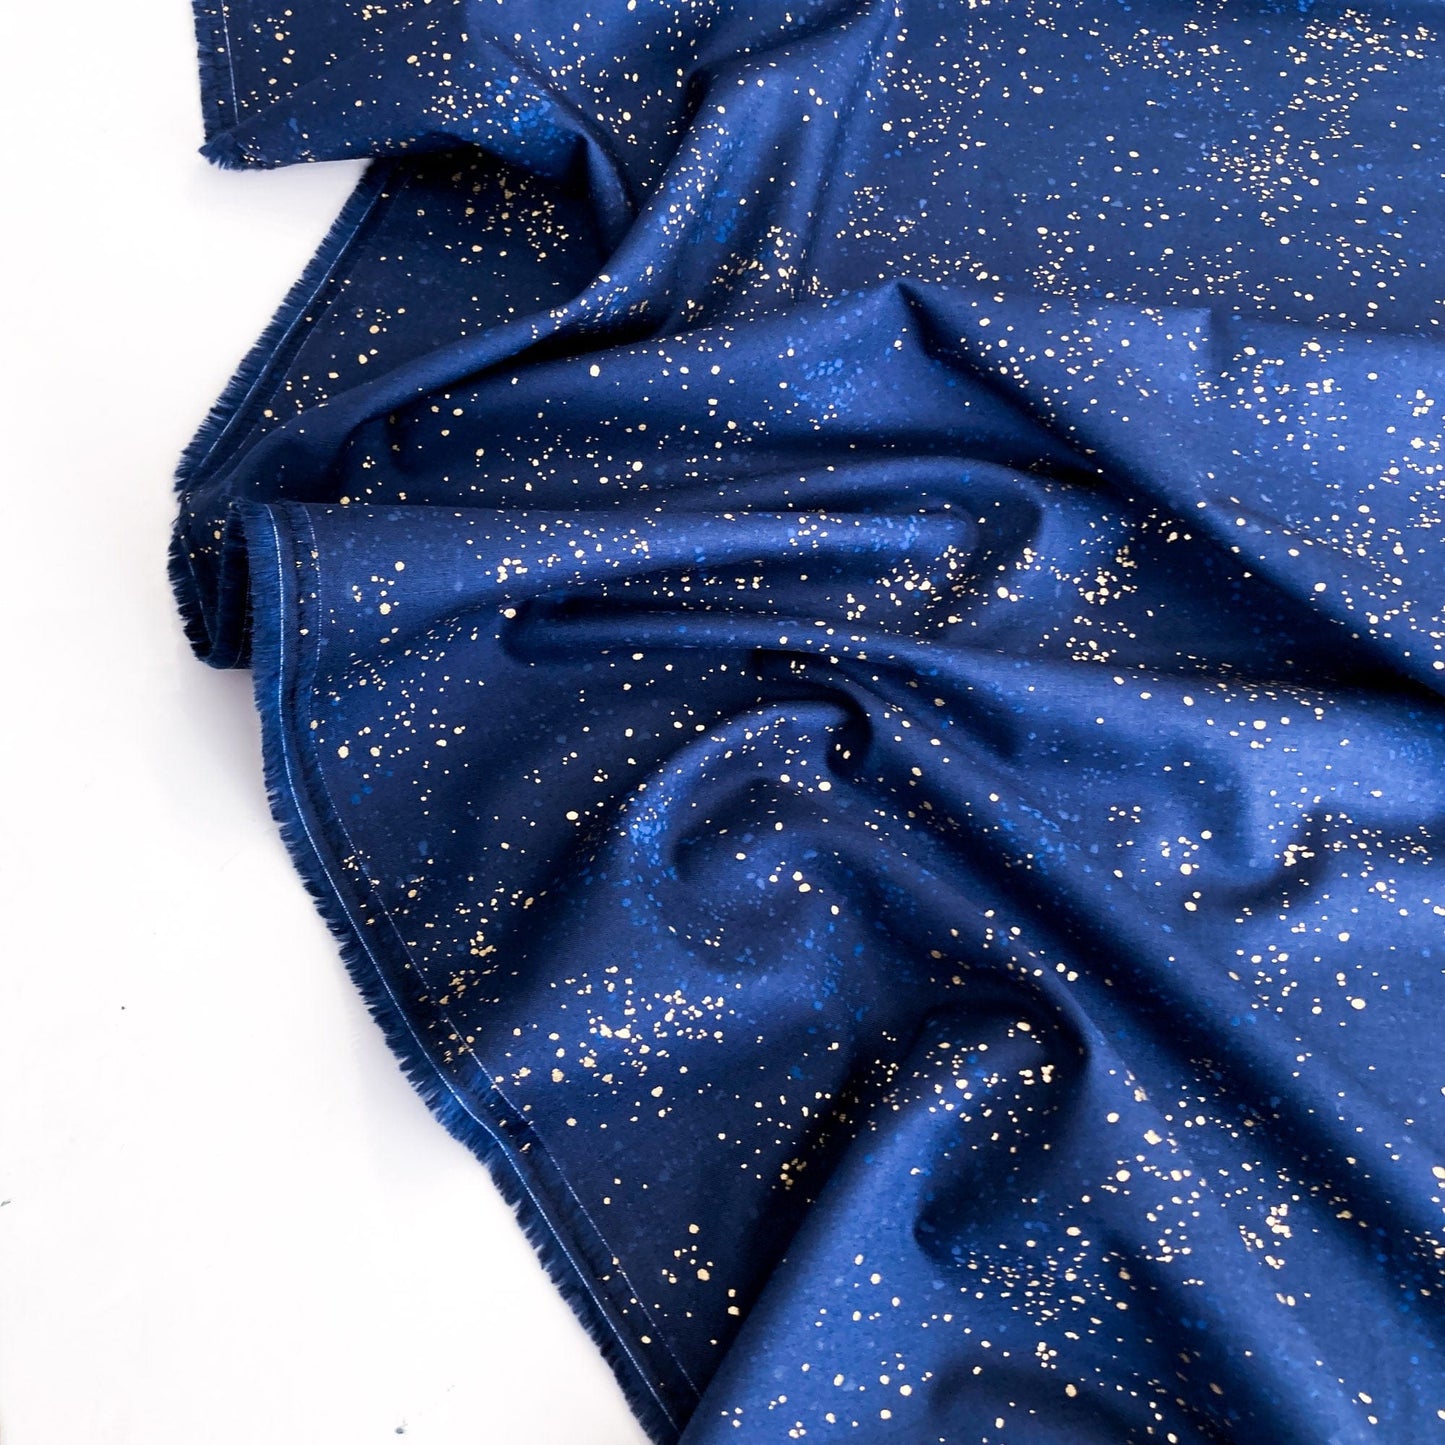 Ruby Star Society 'Speckled' Quilting Cotton in 'Navy' (Metallic)